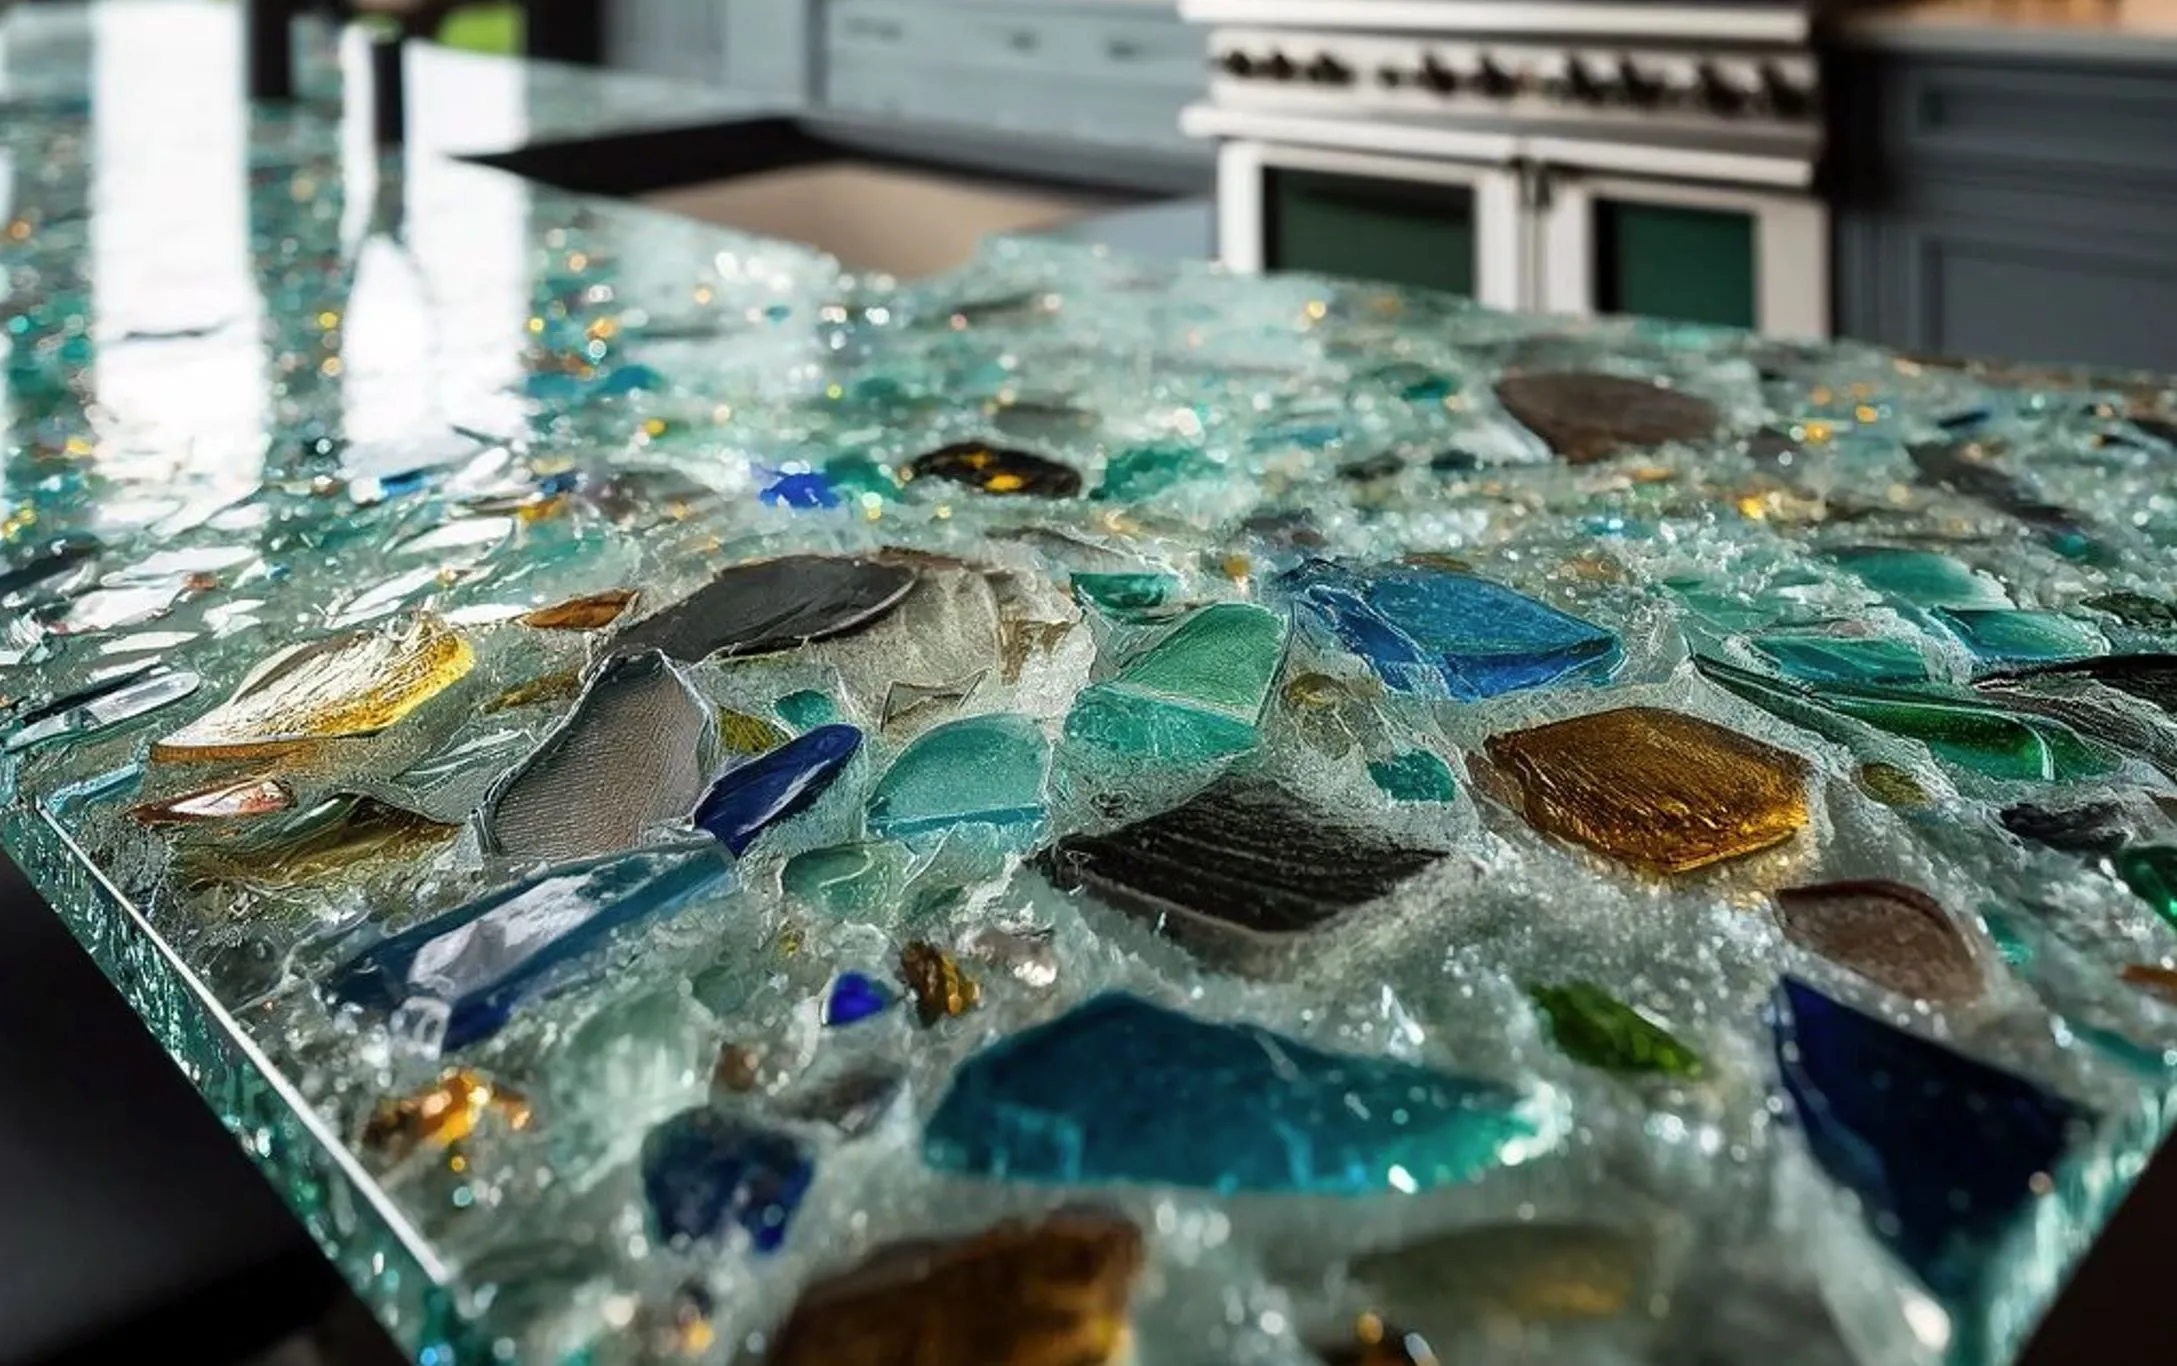 Surface damage like chips, cracks, or breaks can be tough to repair, even though most glass kitchen counters have a lengthy lifespan.